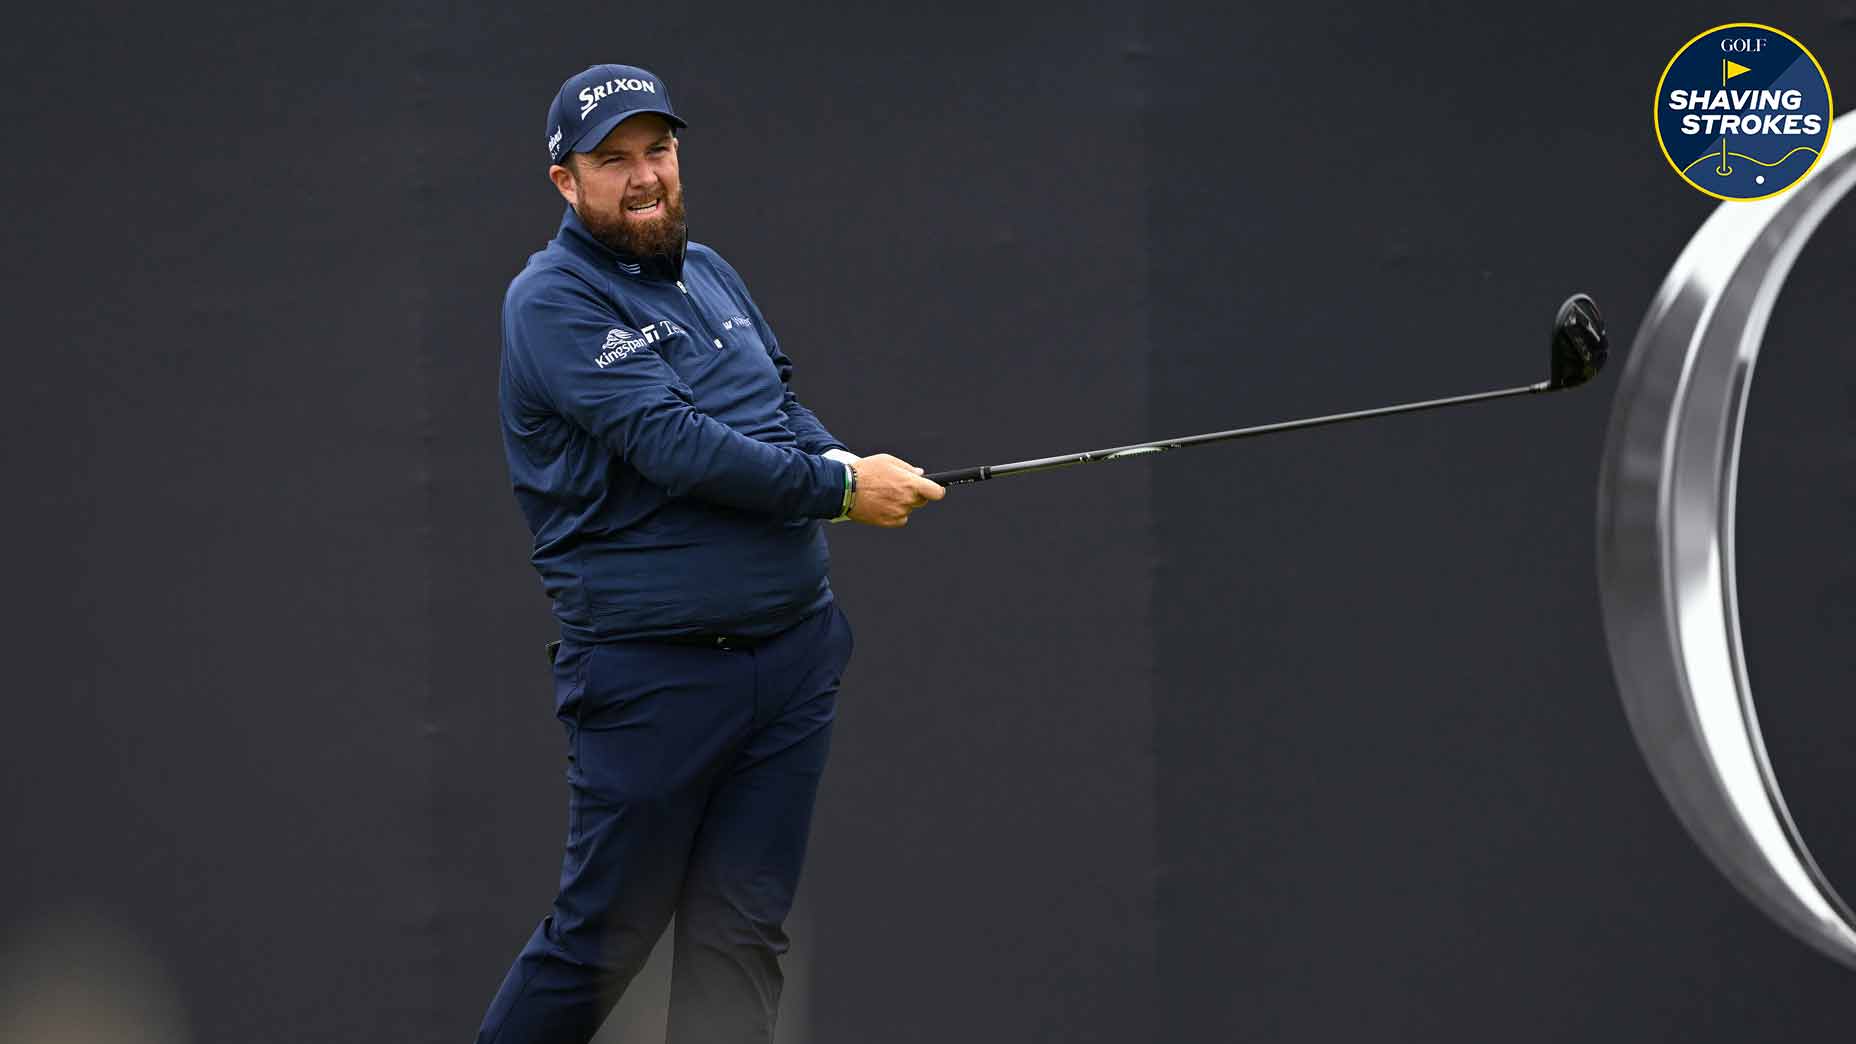 GOLF Top 100 Teacher David Woods says tee height is crucial for this year's Open Championship, and argues it could determine the winner